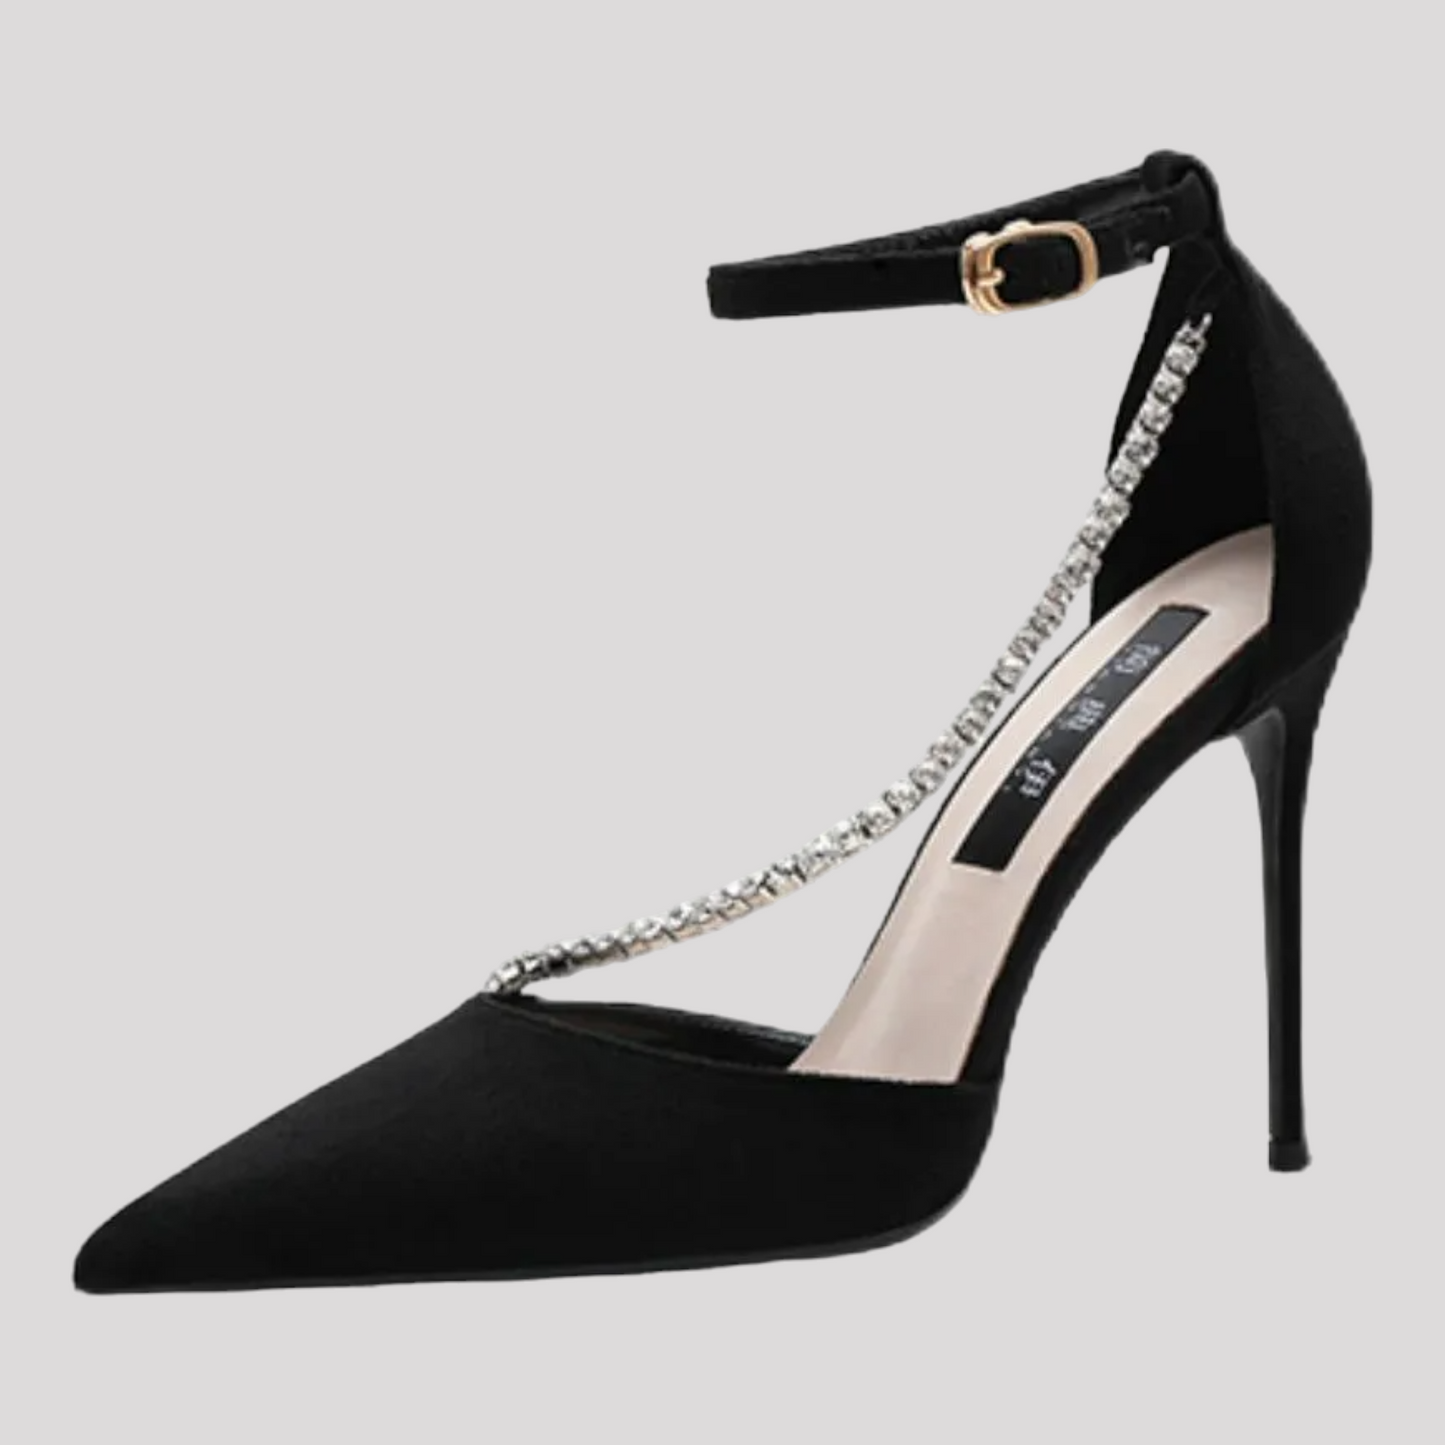 Ankle Strap with Diamonte Detail High Heels available in 2 heel heights